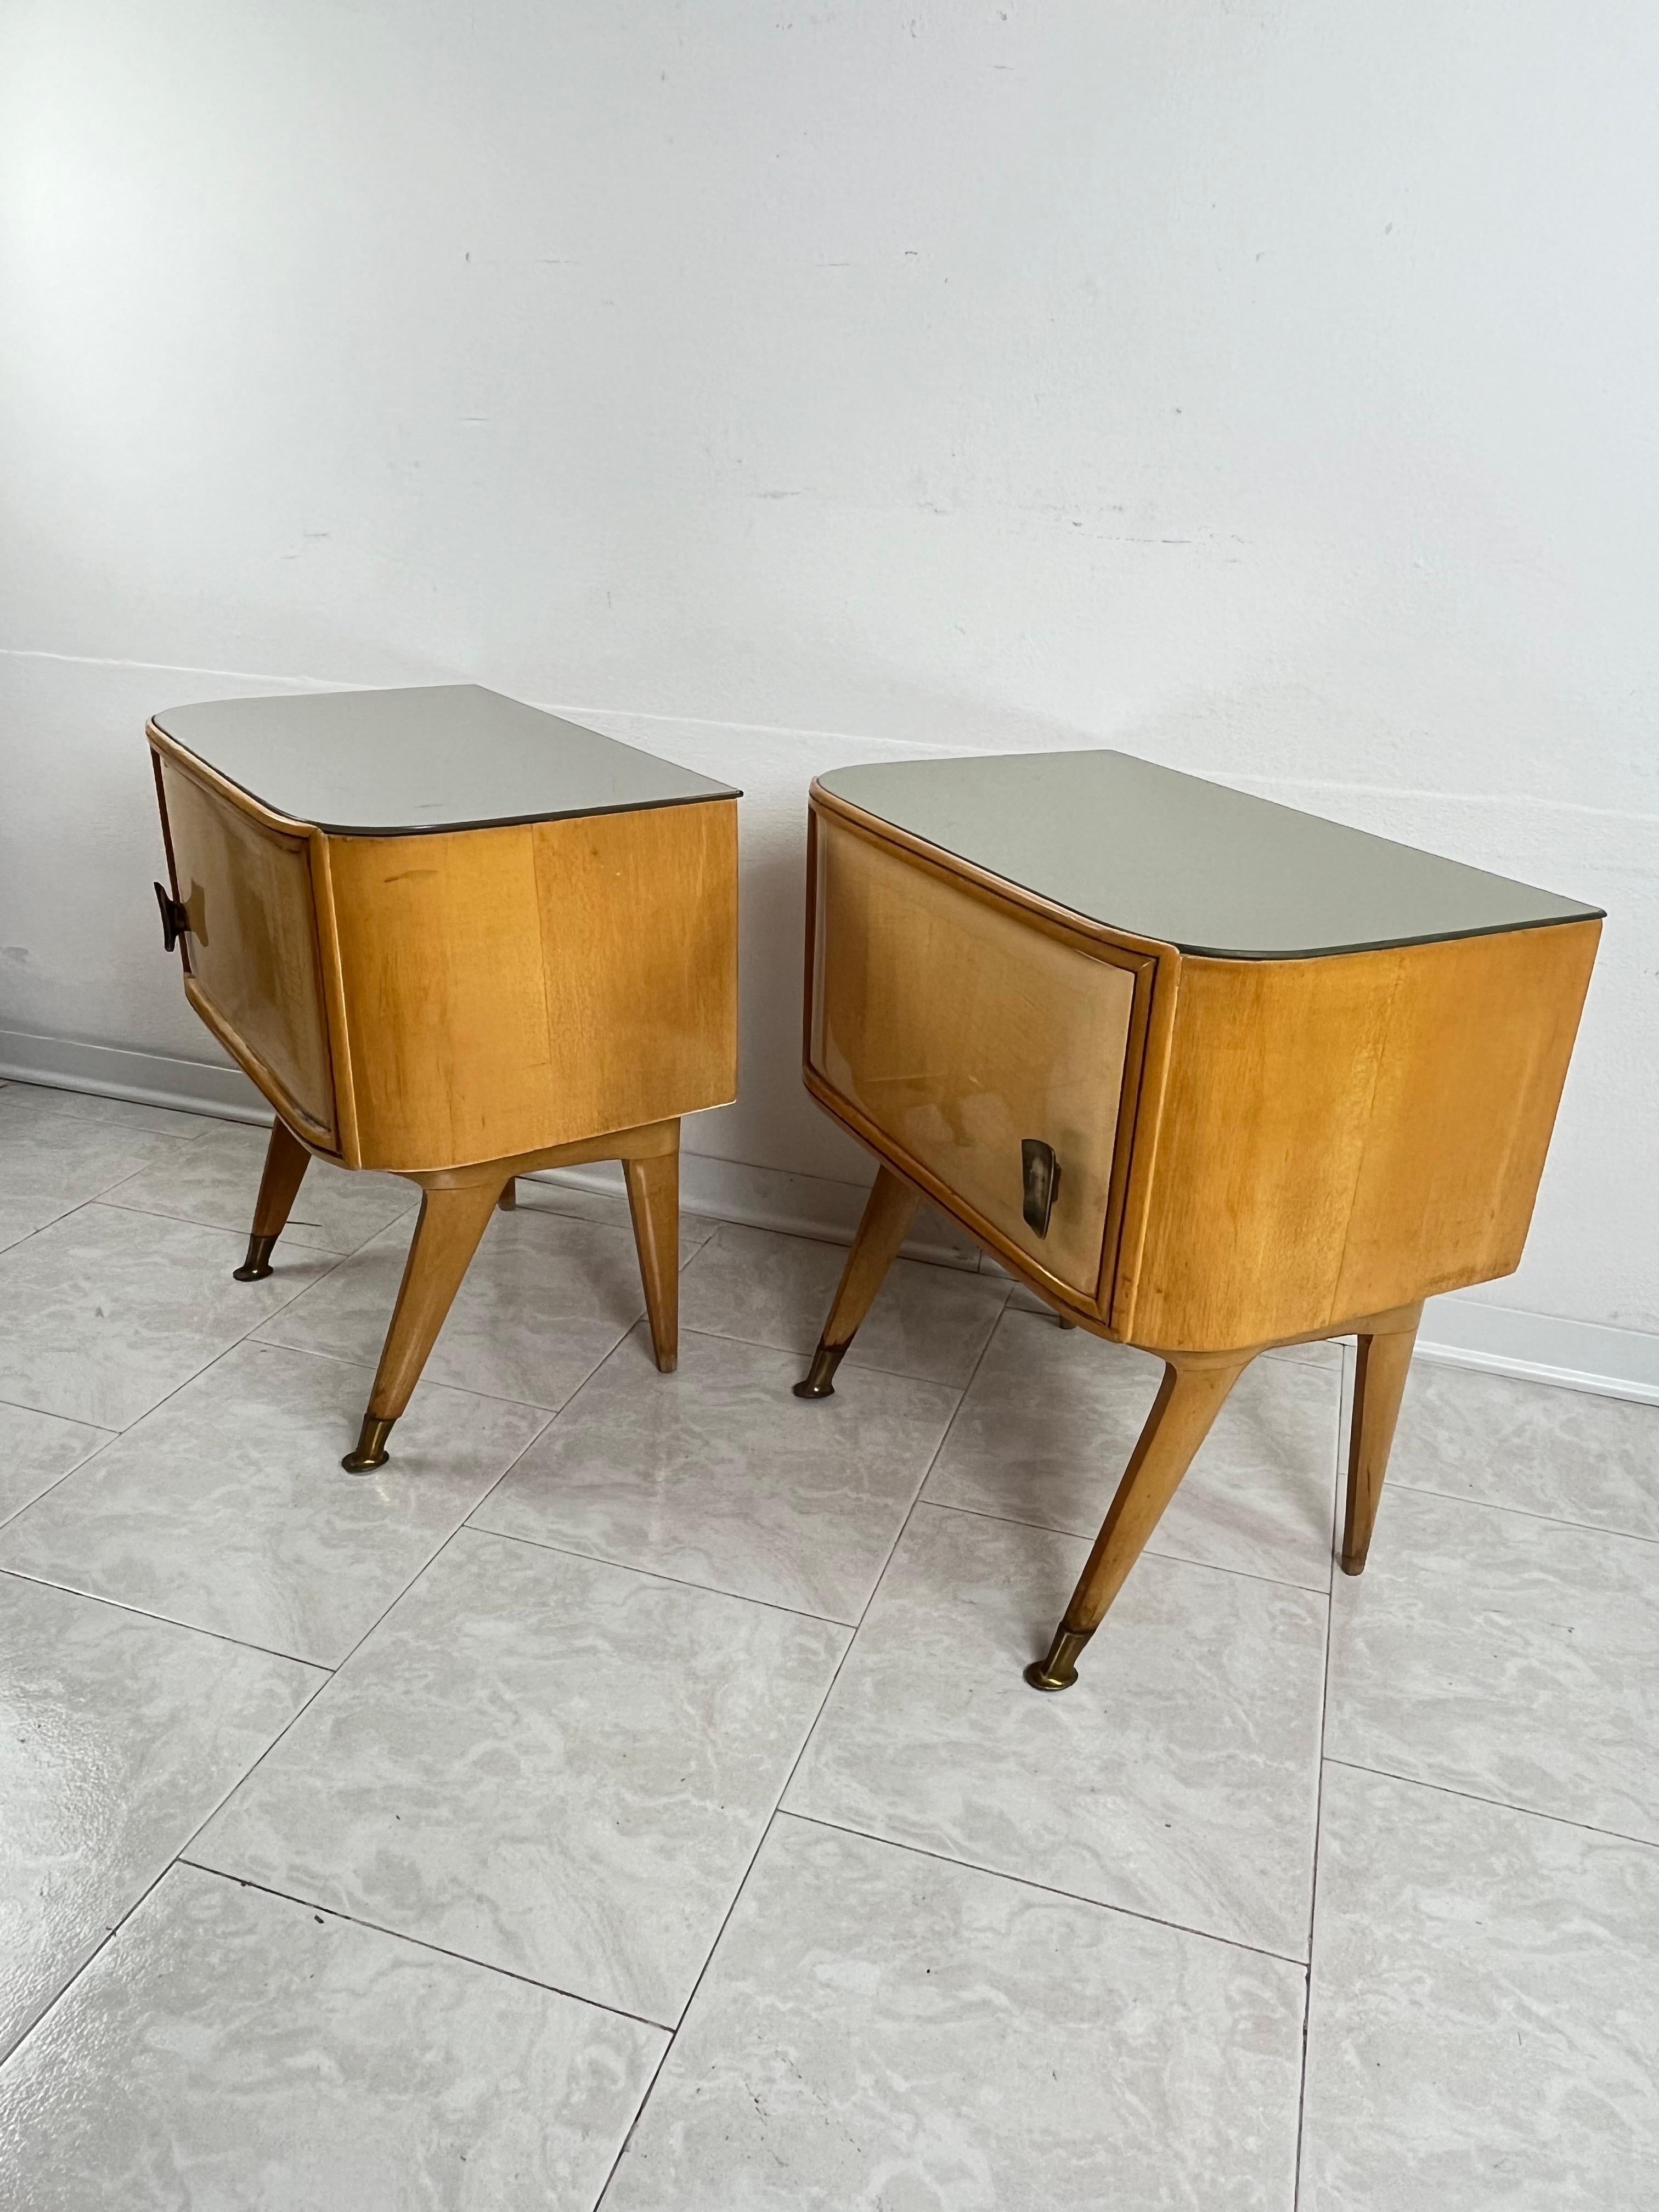 Brass Set Of 2 Mid-Century Bedside Tables Attributed to Vittorio Dassi 1959 For Sale